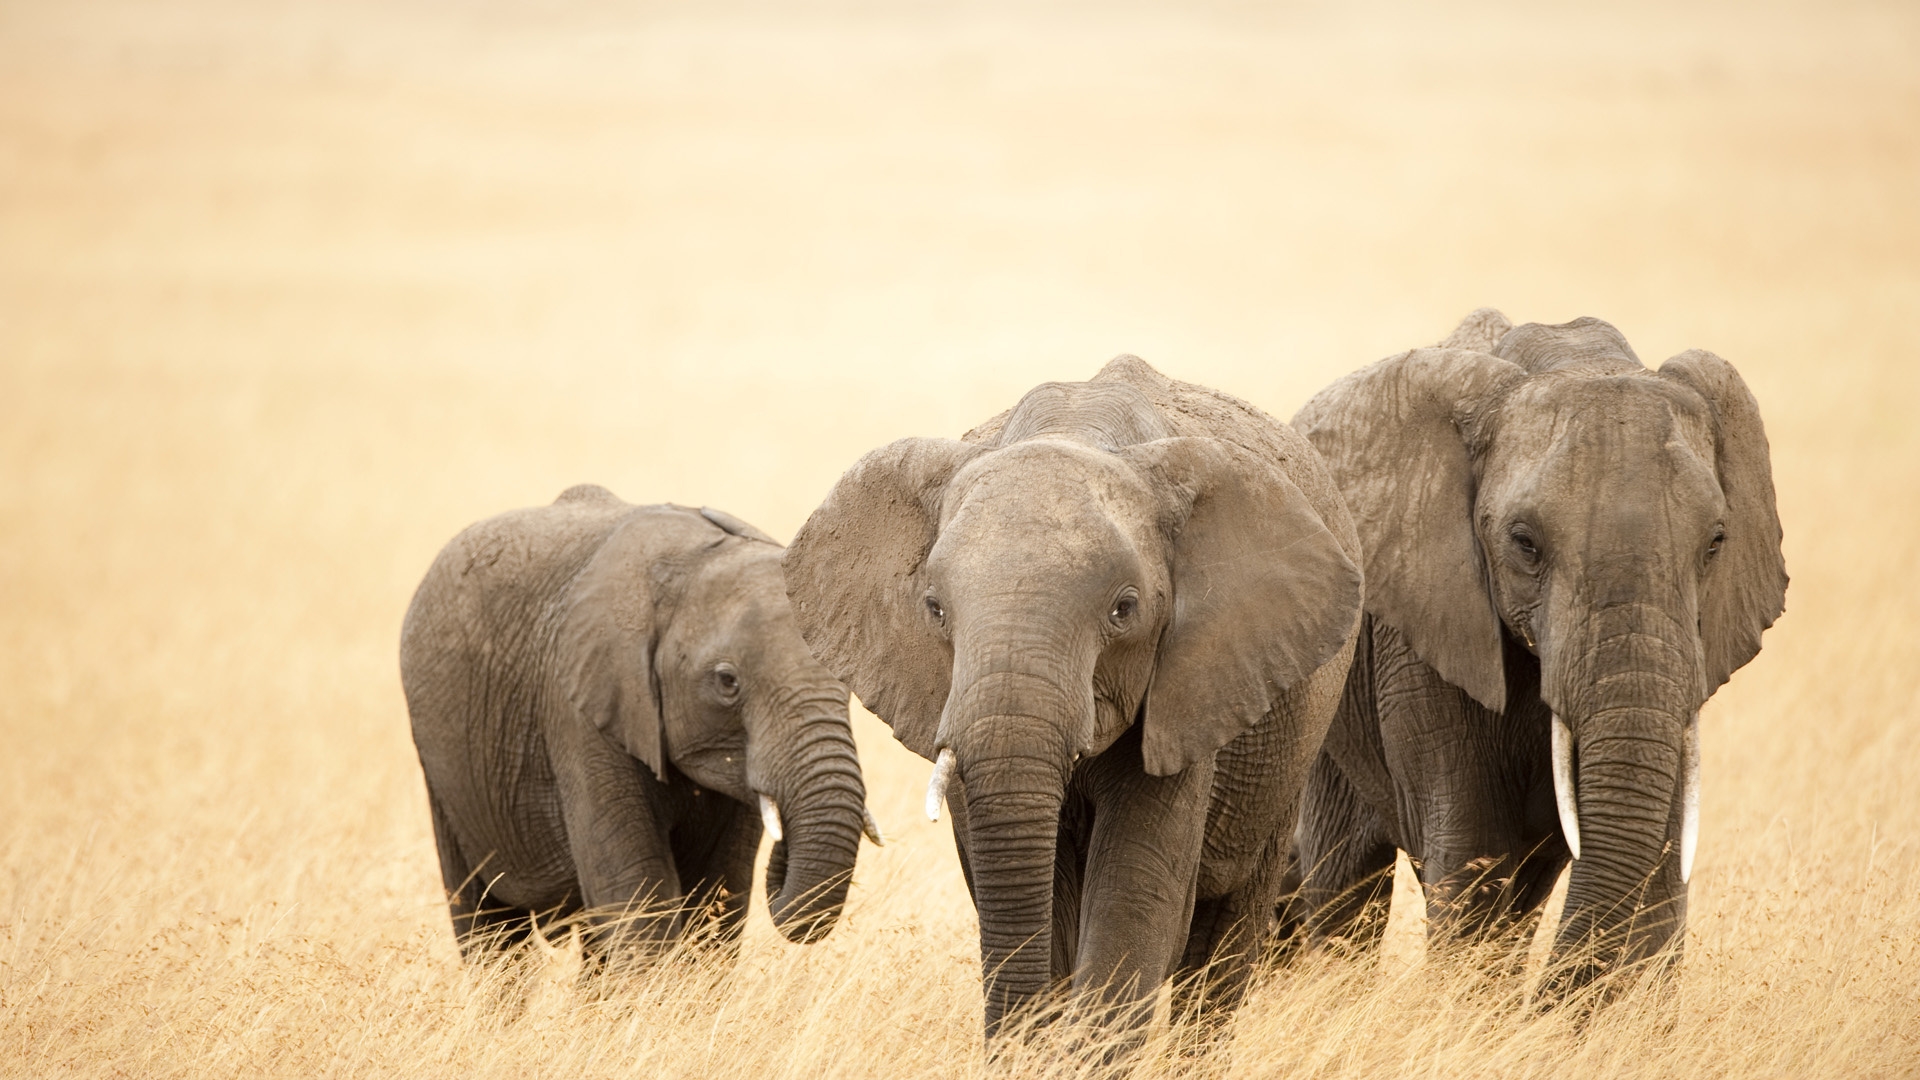 A family of elephants roaming Africa